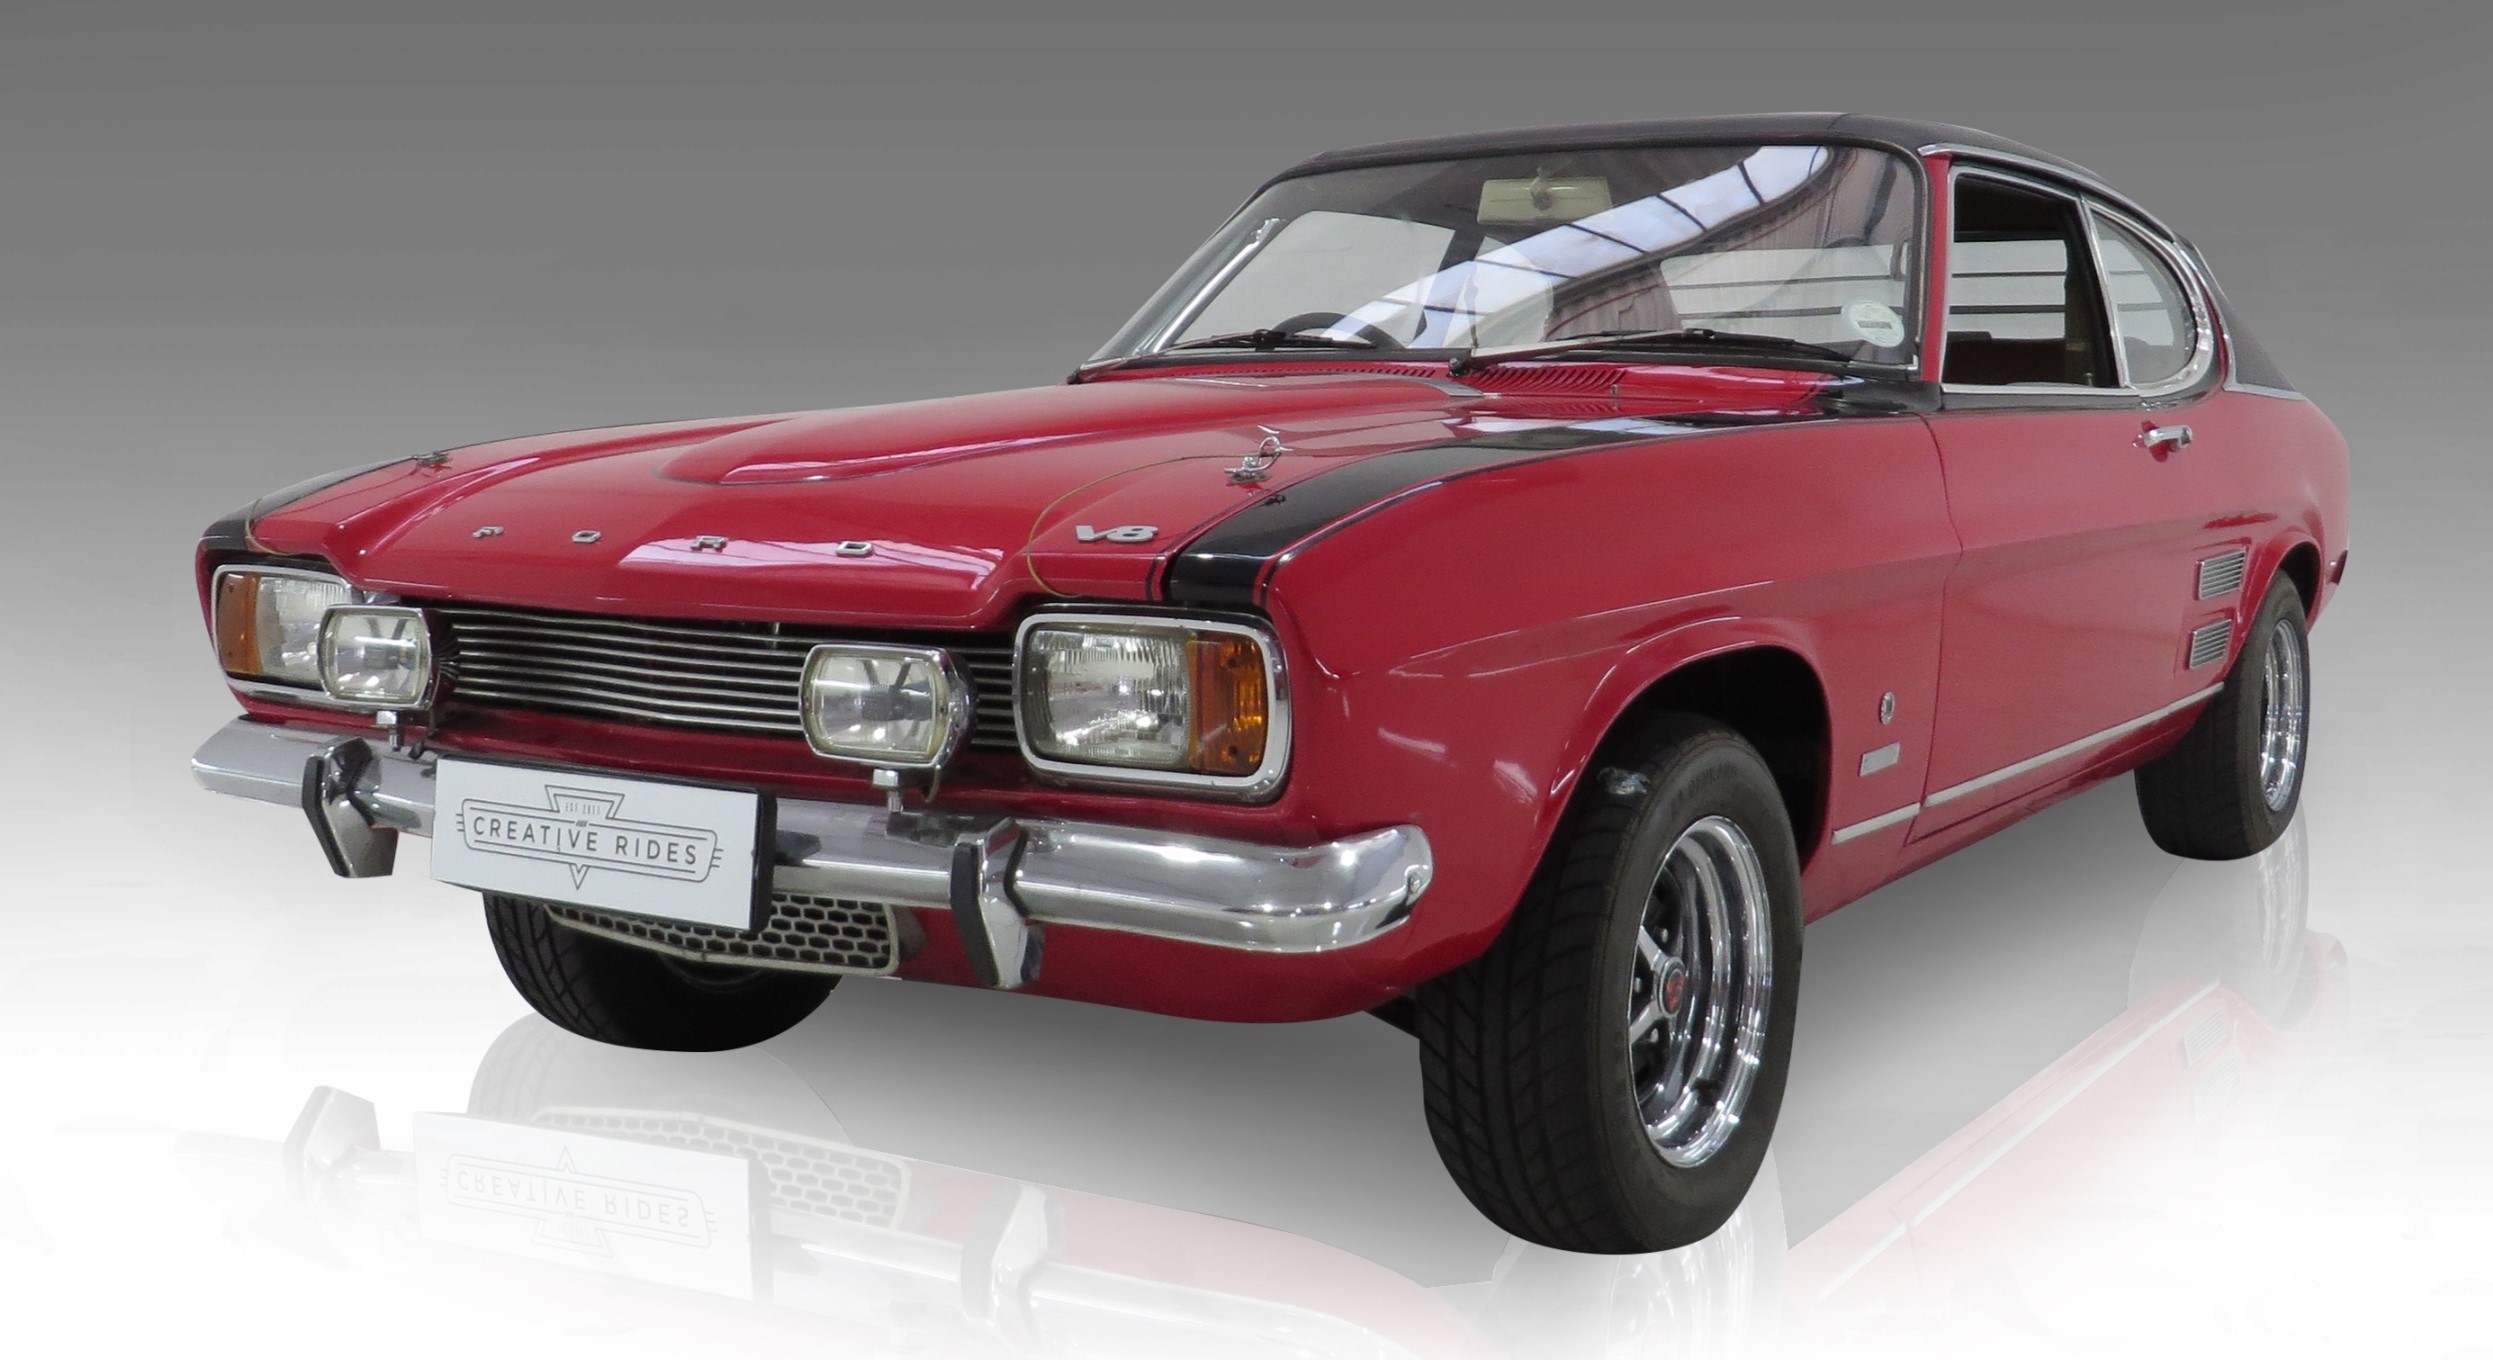 alfa romeo, chevrolet corvette, creative rides, ford capri perana, nissan, top 5 picks for this week’s rare car auction in cape town – and how much they could sell for